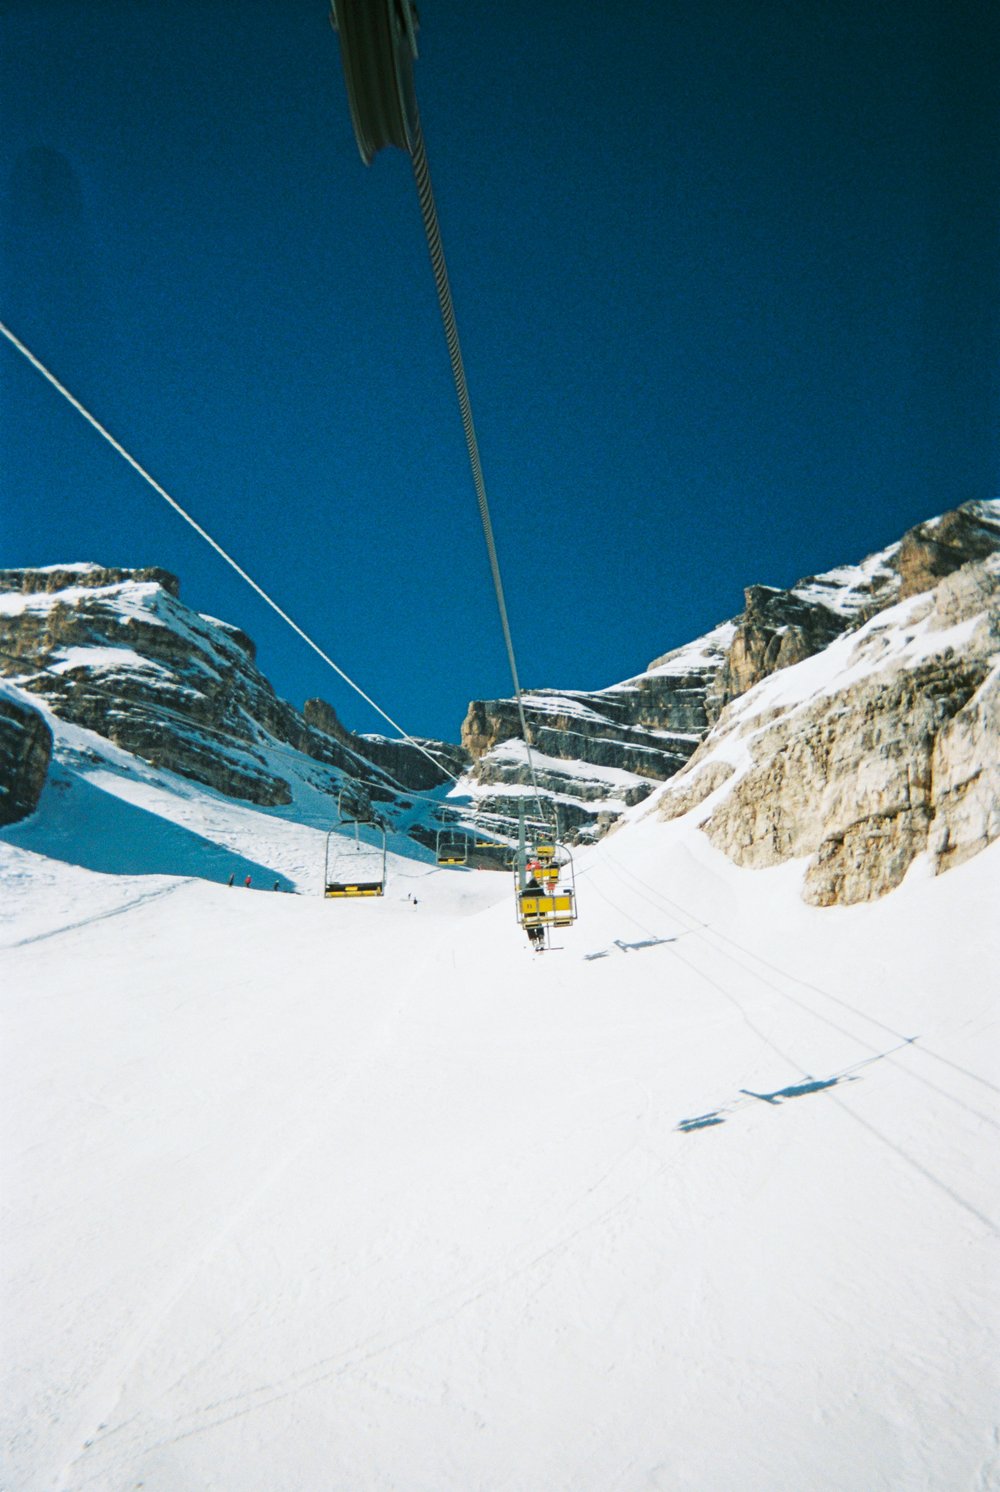 The Lift to the top of Socrepes